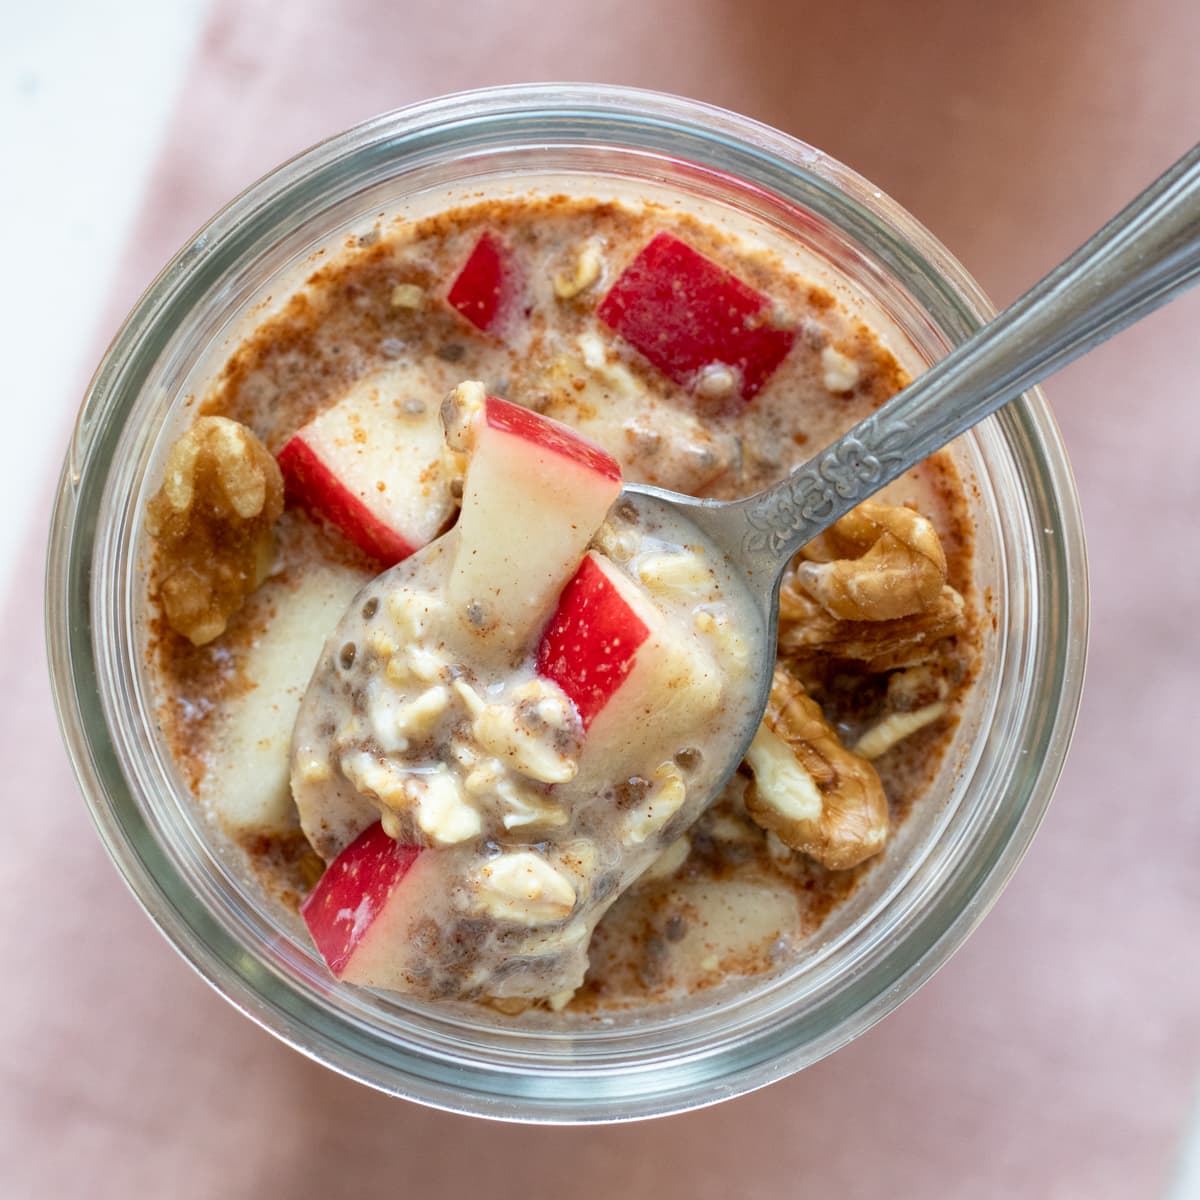 Apple Pie Overnight Oats - Life With Ayla Rianne